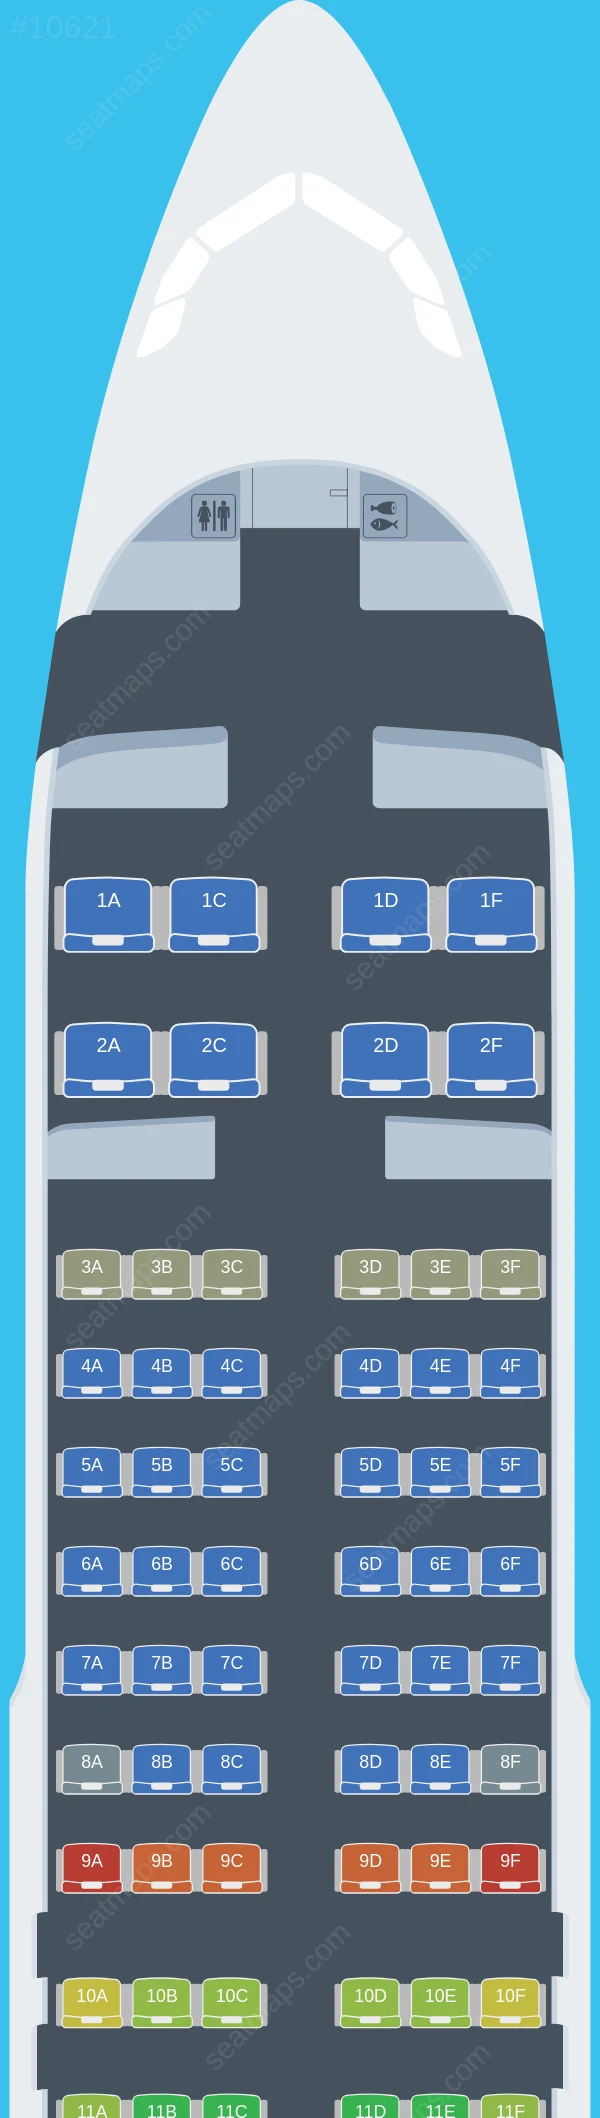 FITS Aviation Airbus A320-200 seatmap preview